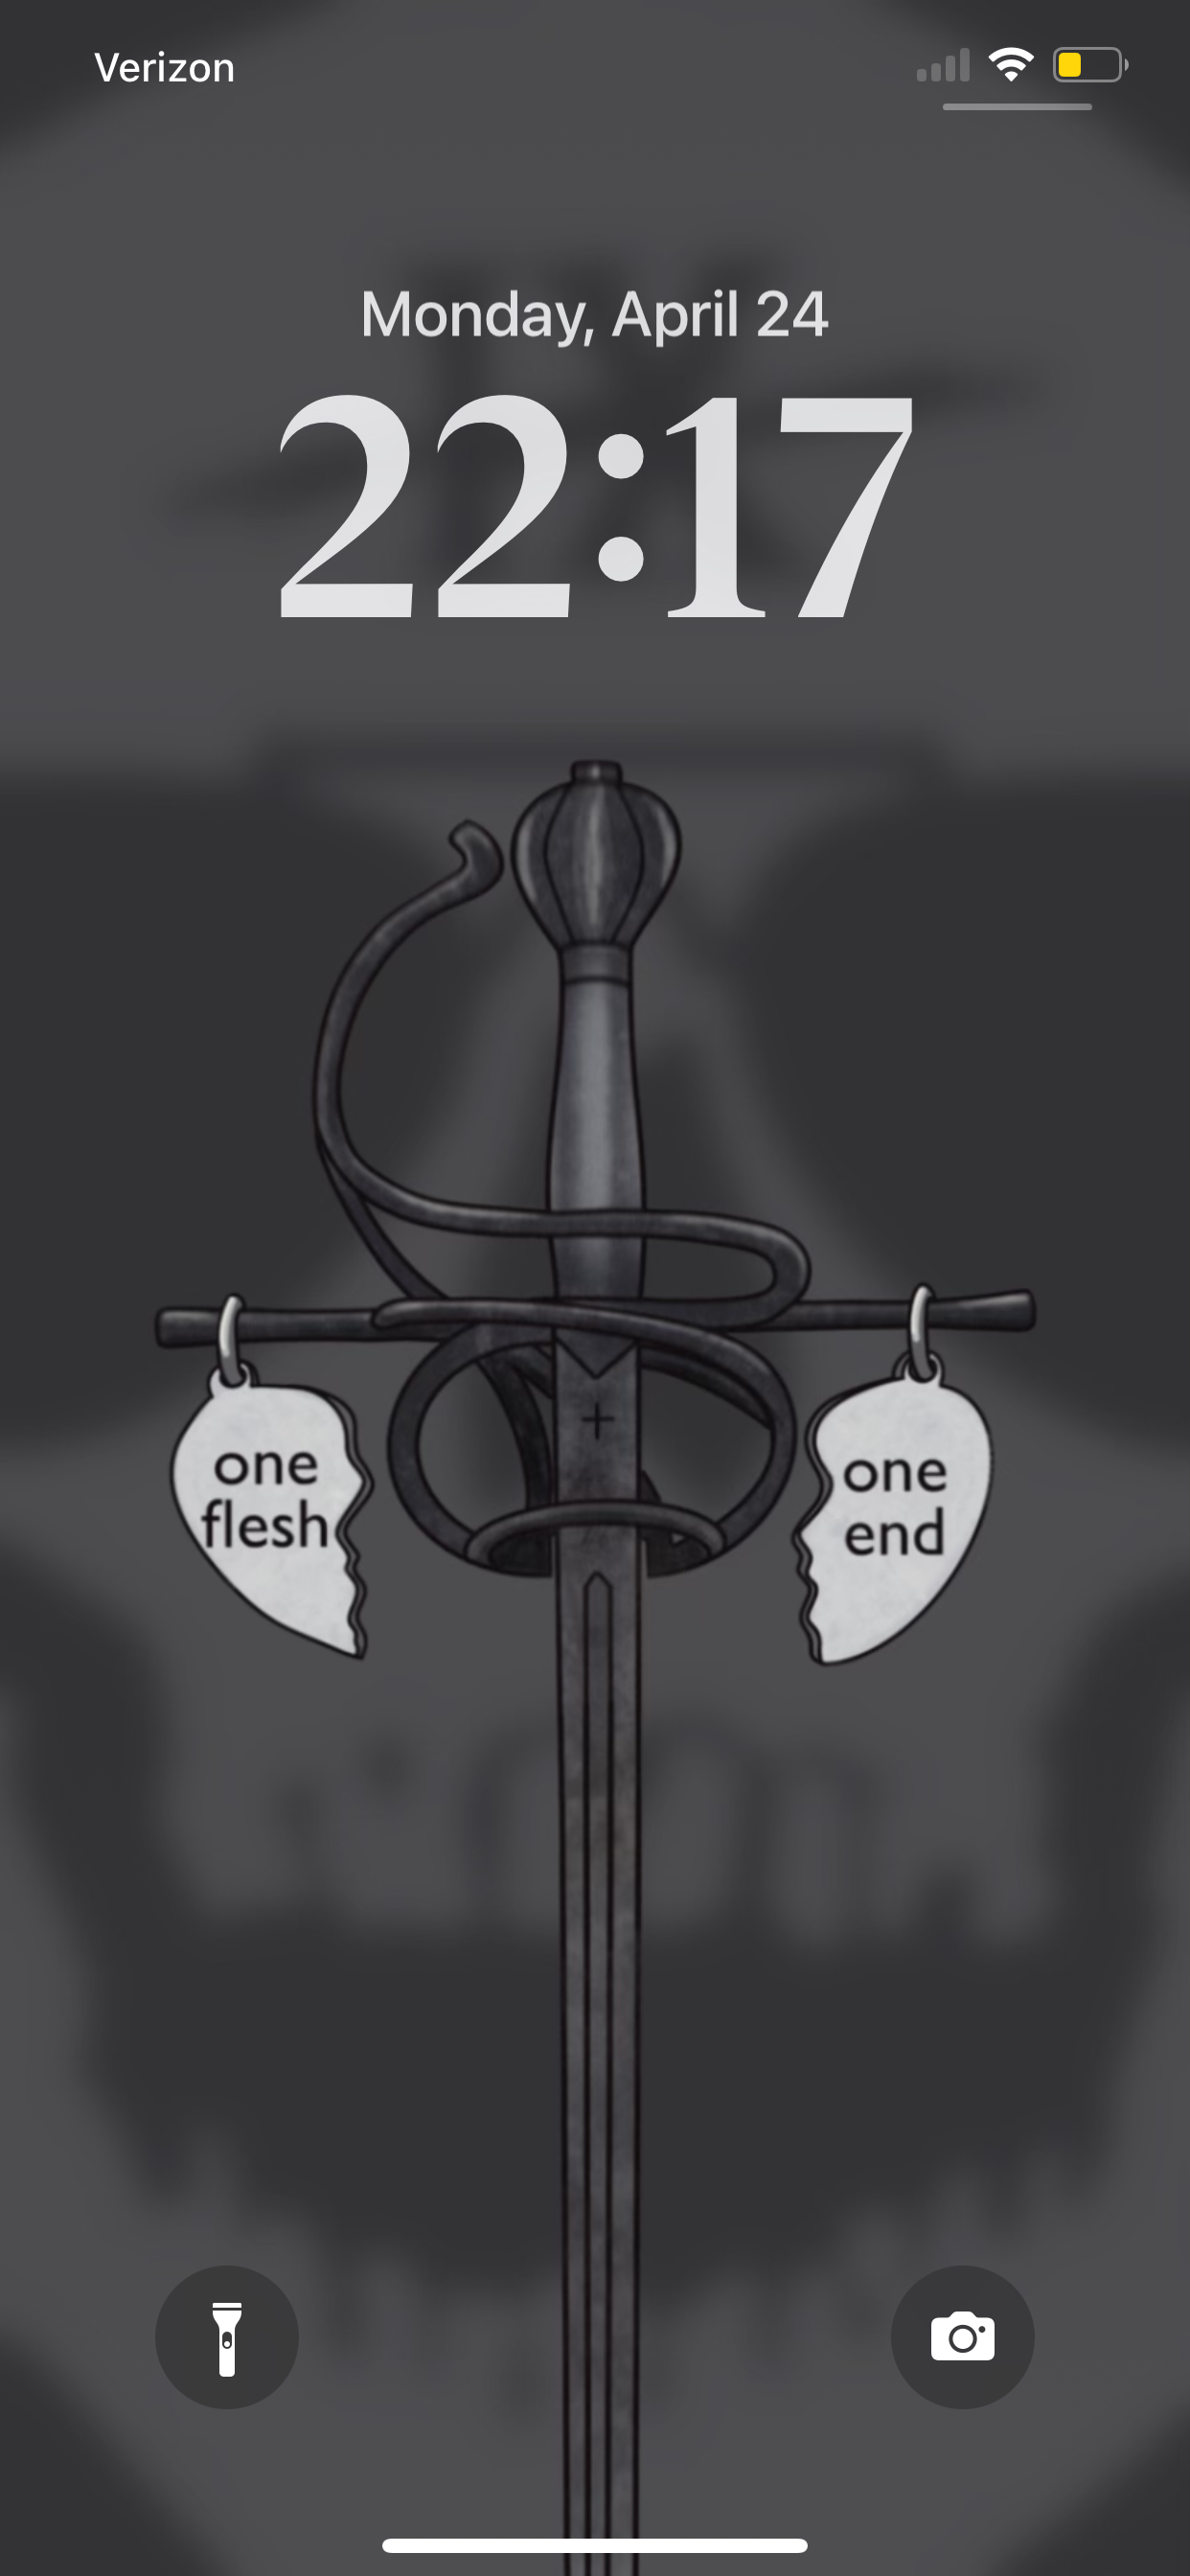 Image of phone lockscreen showing the "one flesh one end" wallpaper. The wallpaper is a black and grey design showcasing the handle of a black metal rapier with two charms hanging on each side of the handle. Each charm is in the shape of a broken heart and has one flesh on the left heart, and one end on the right.